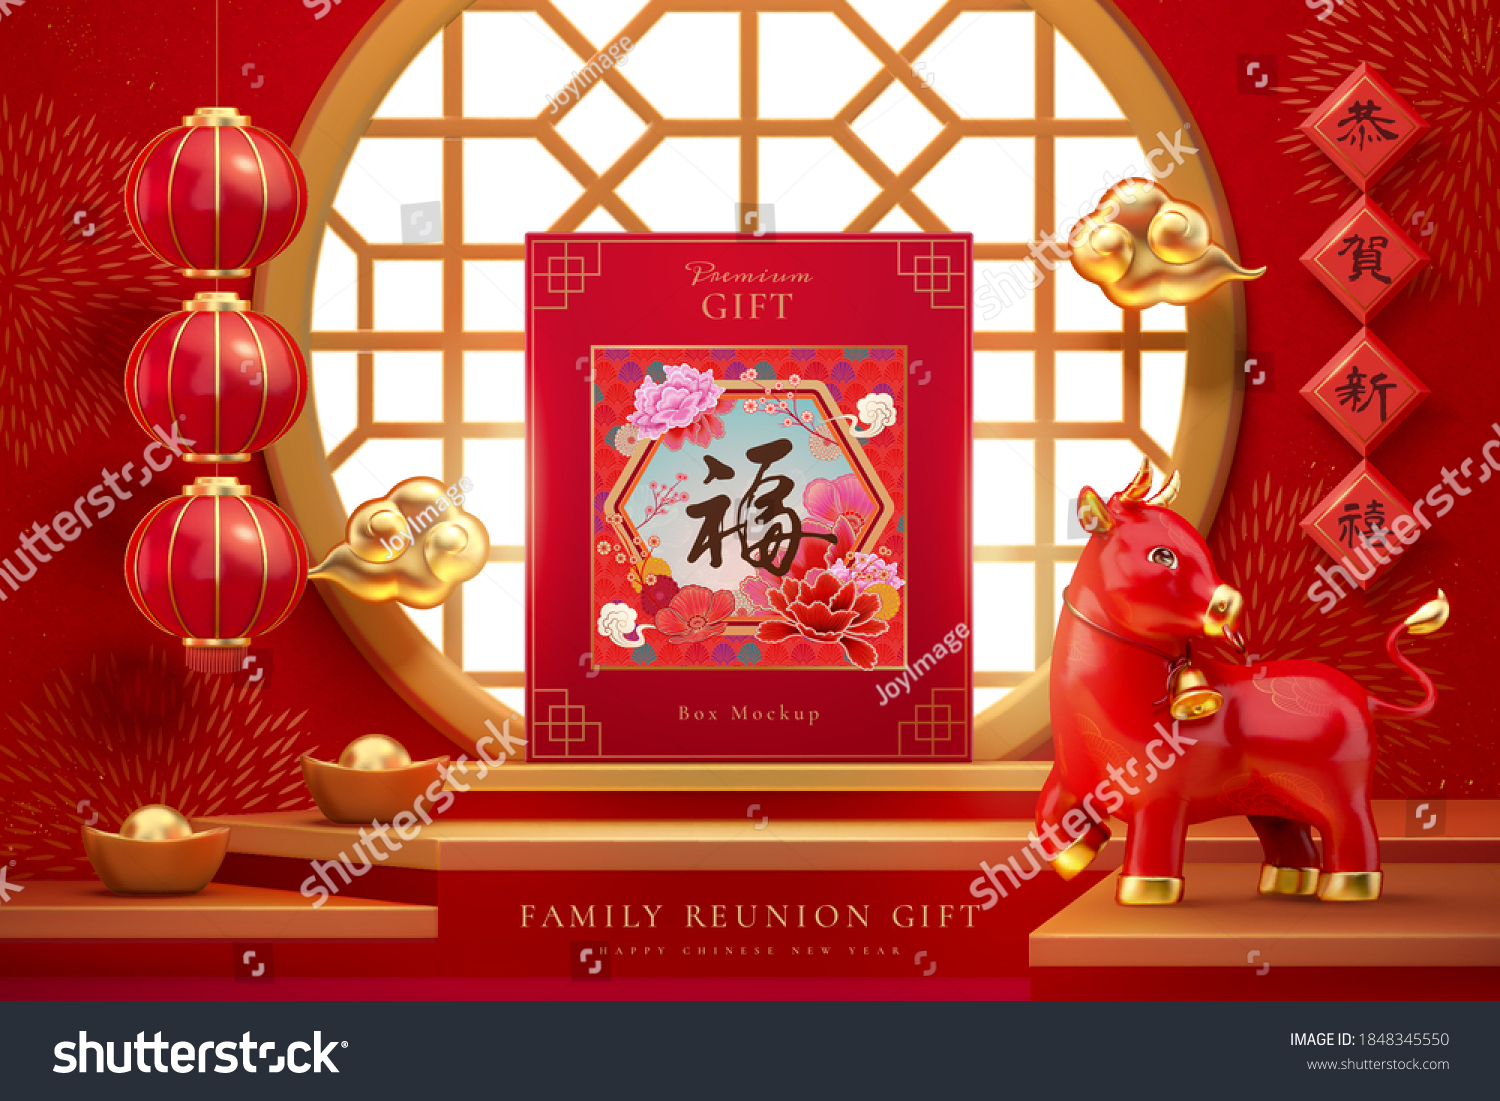 Lunar year gift box displaying on the stage with cute 3d illustration ox, Chinese translation: blessing, Happy lunar new year #1848345550